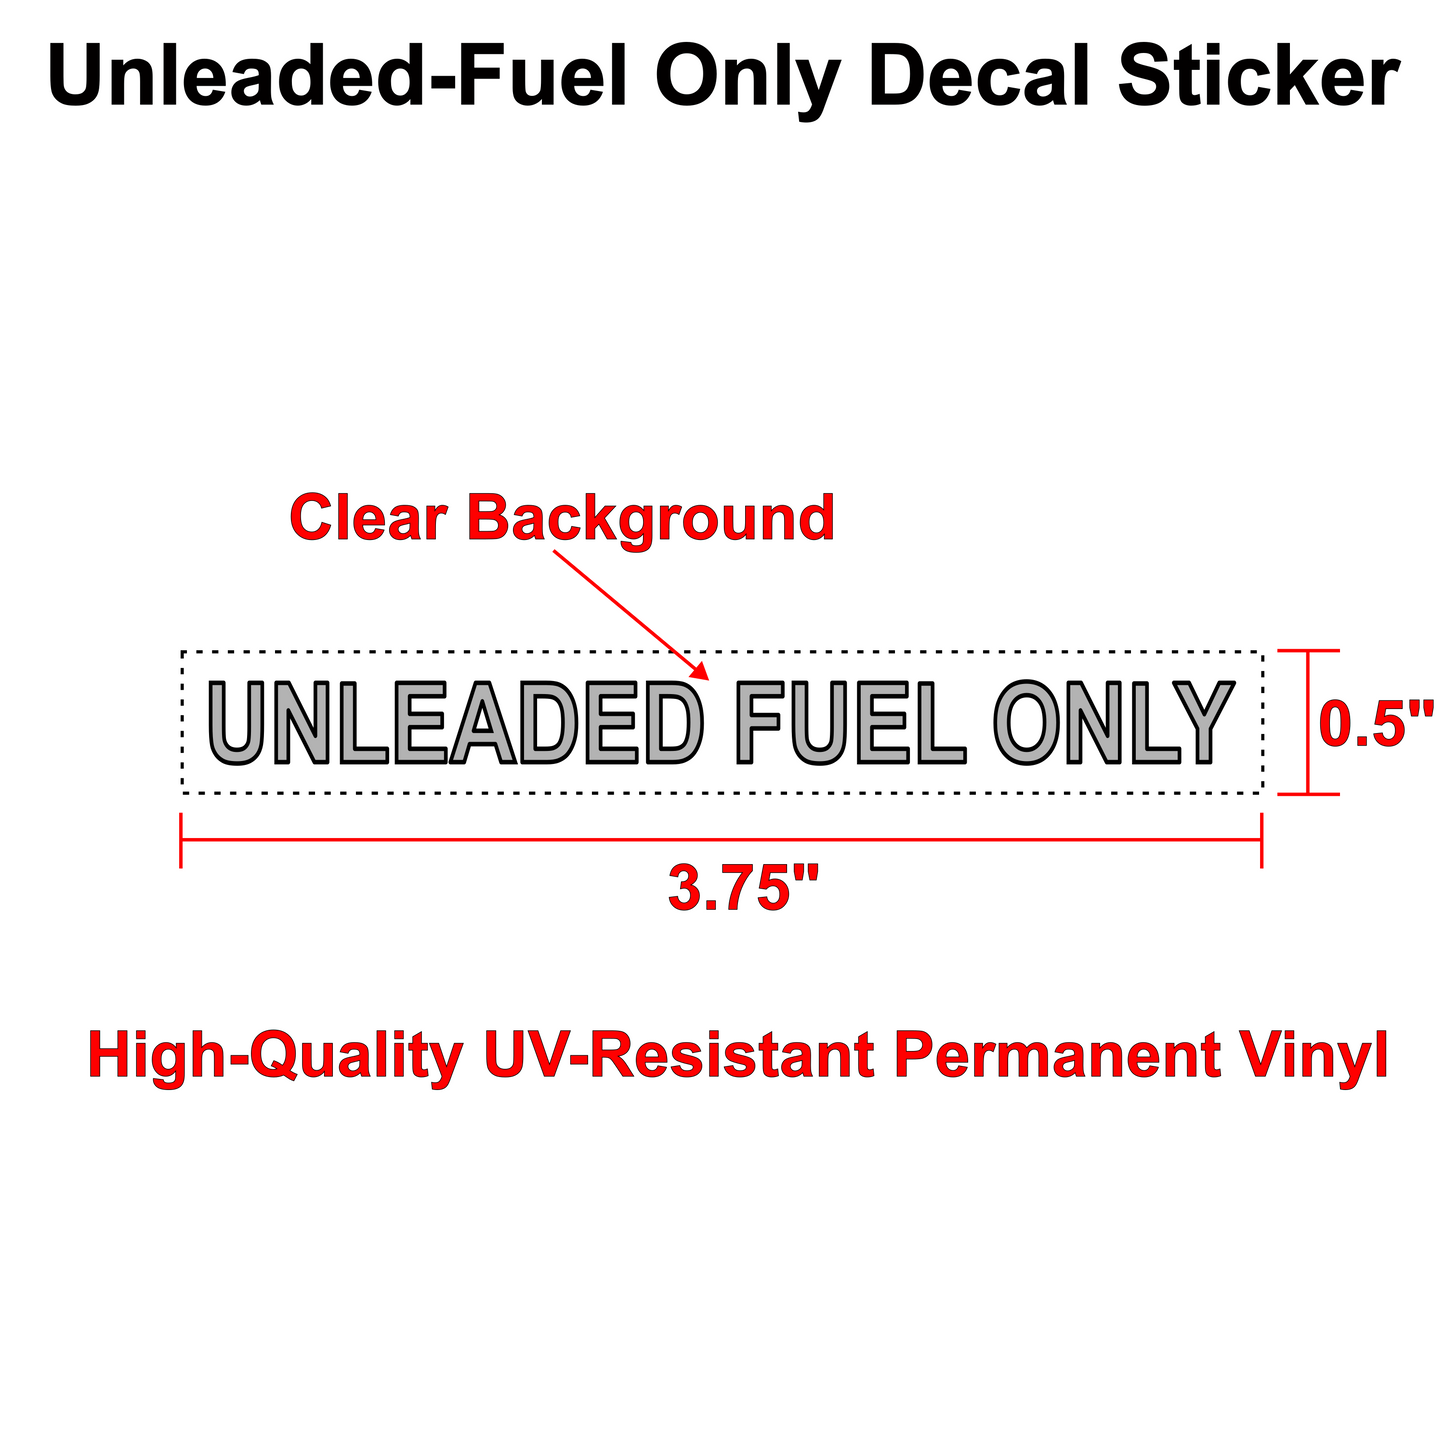 Unleaded Fuel Only Warning Label (Small)